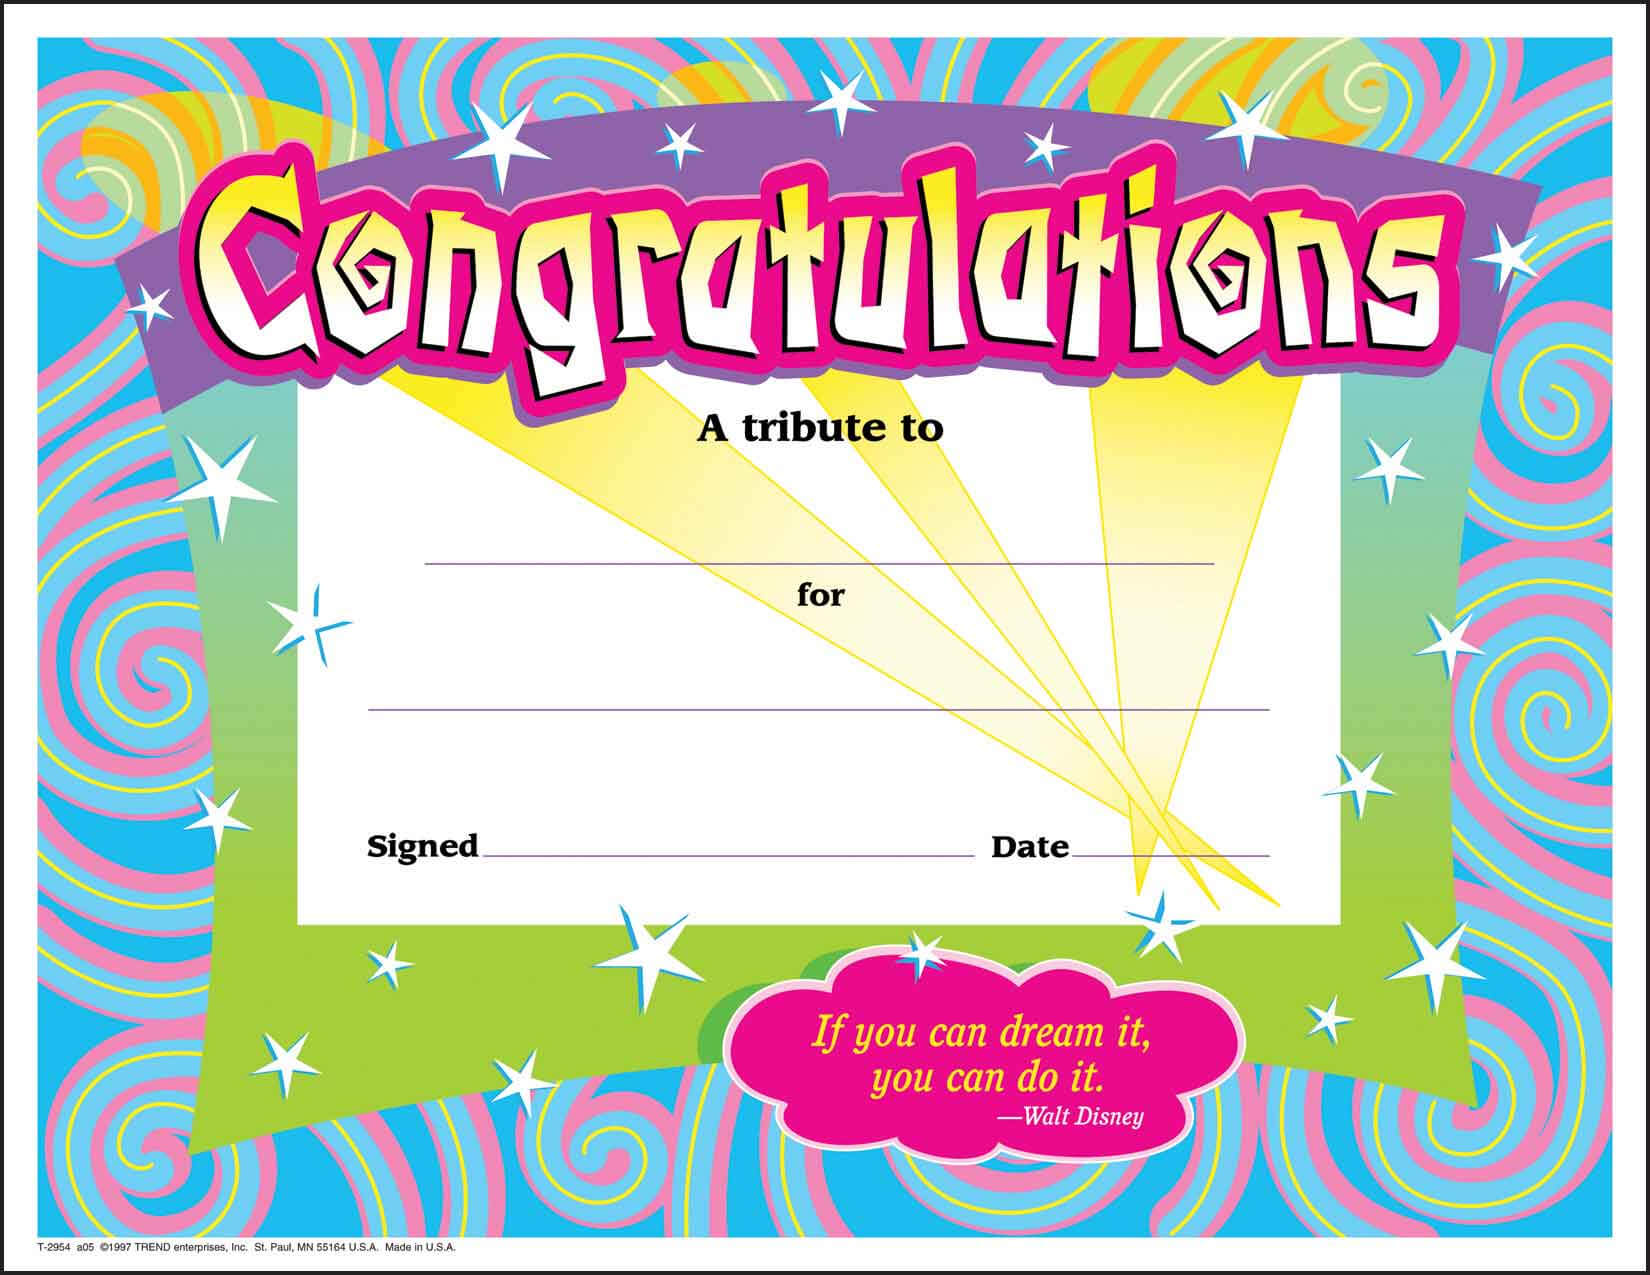 30 Congratulations Awards (Large) Swirl Certificate Pack Regarding Free Funny Award Certificate Templates For Word